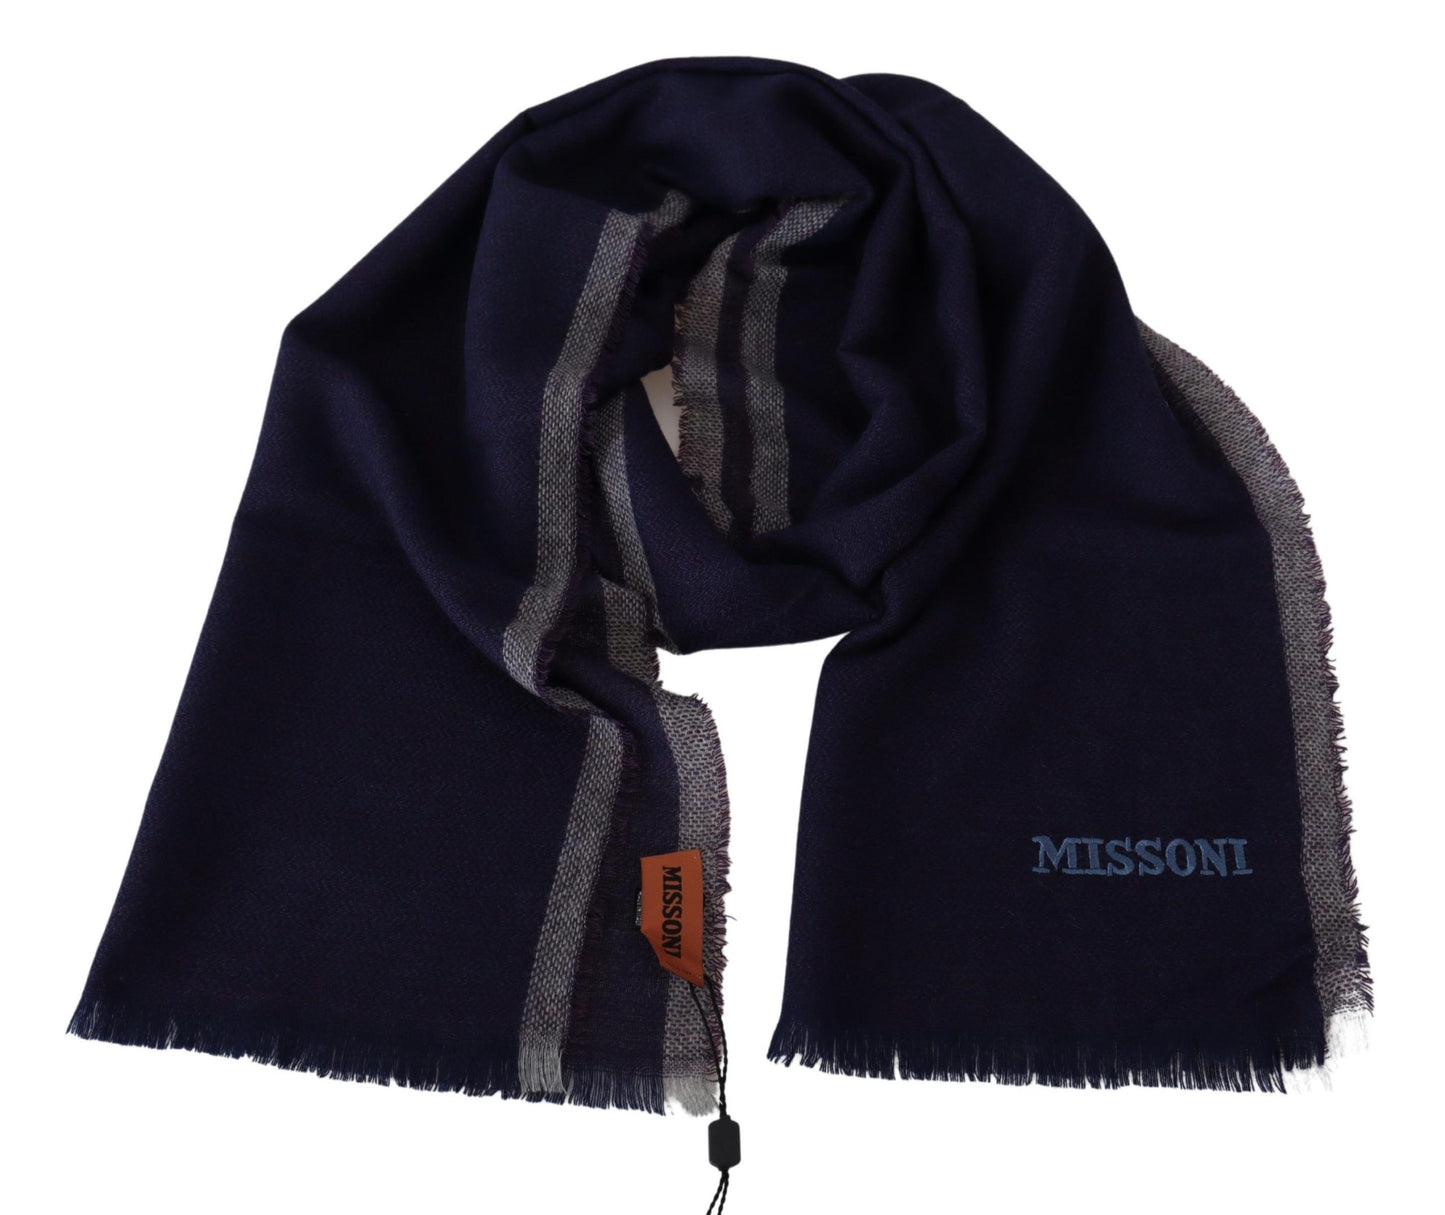 Missoni Authentic Wool Scarf with Striped Pattern